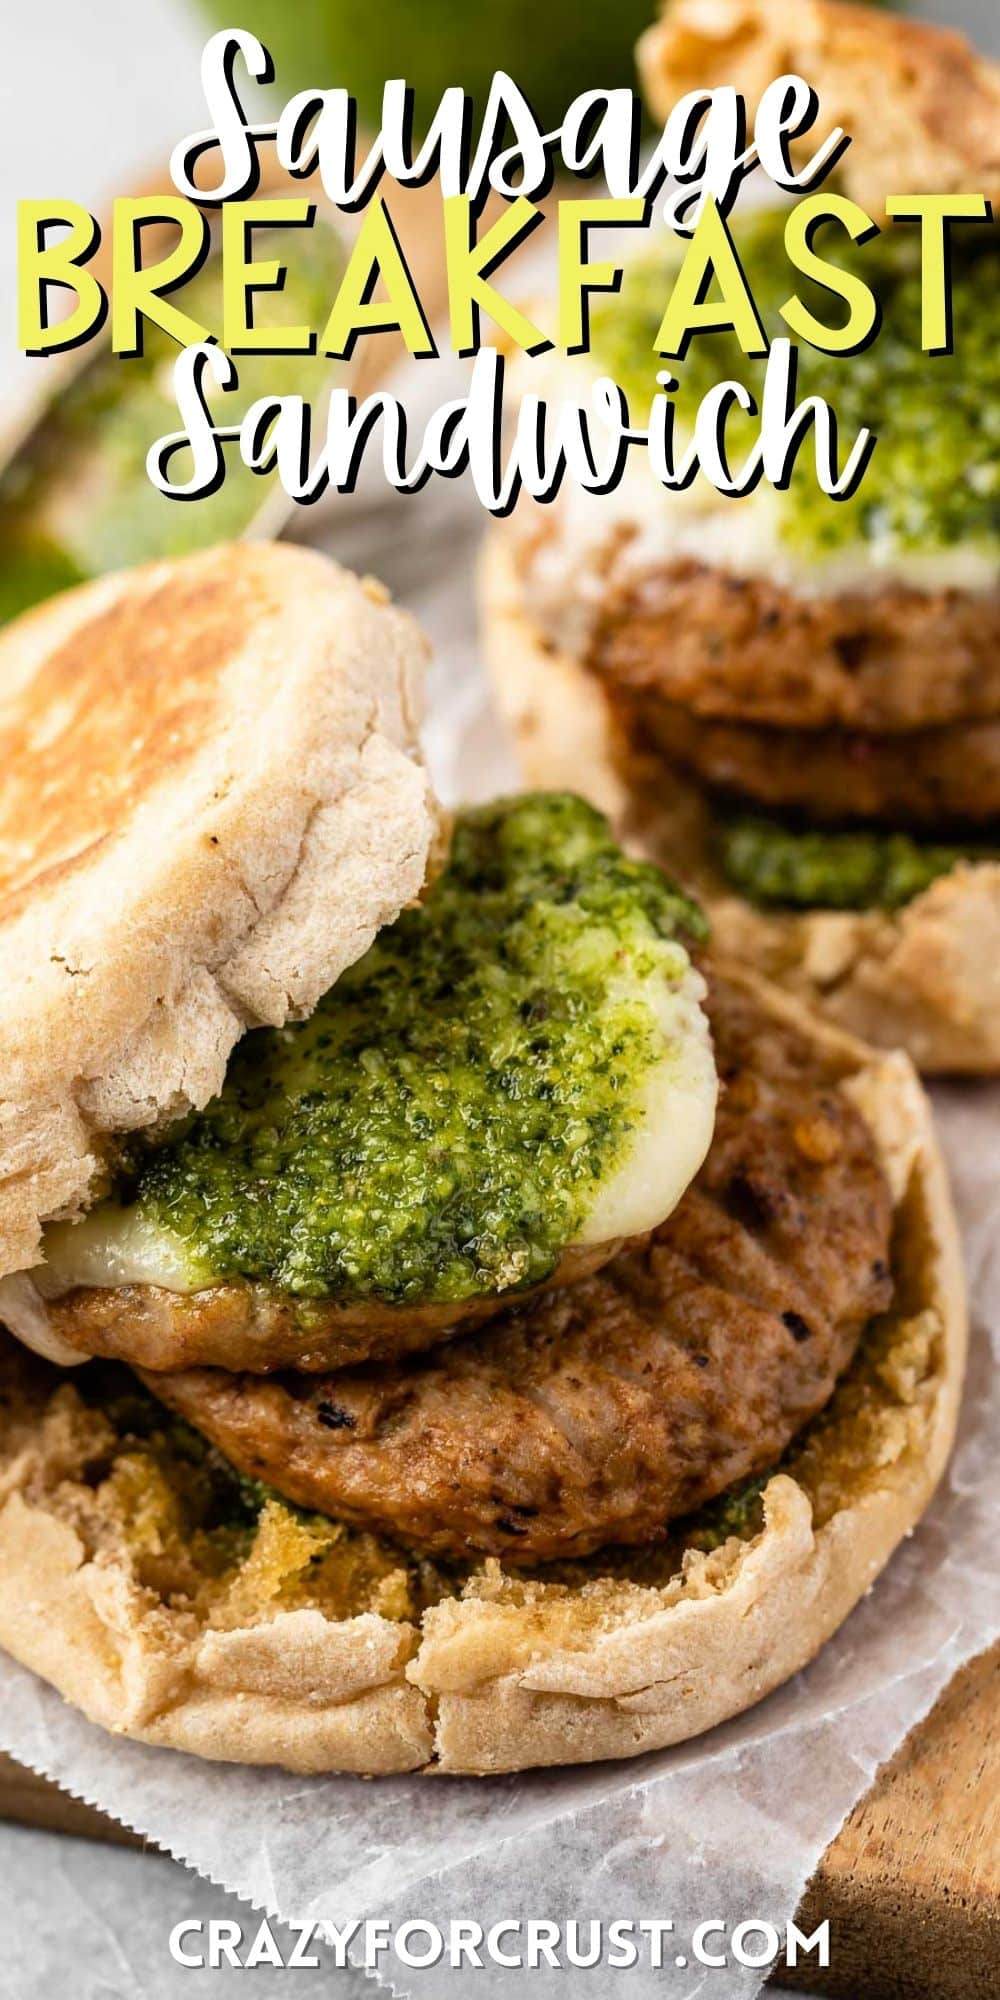 sausage cheese and pesto in a bun with words on the image.